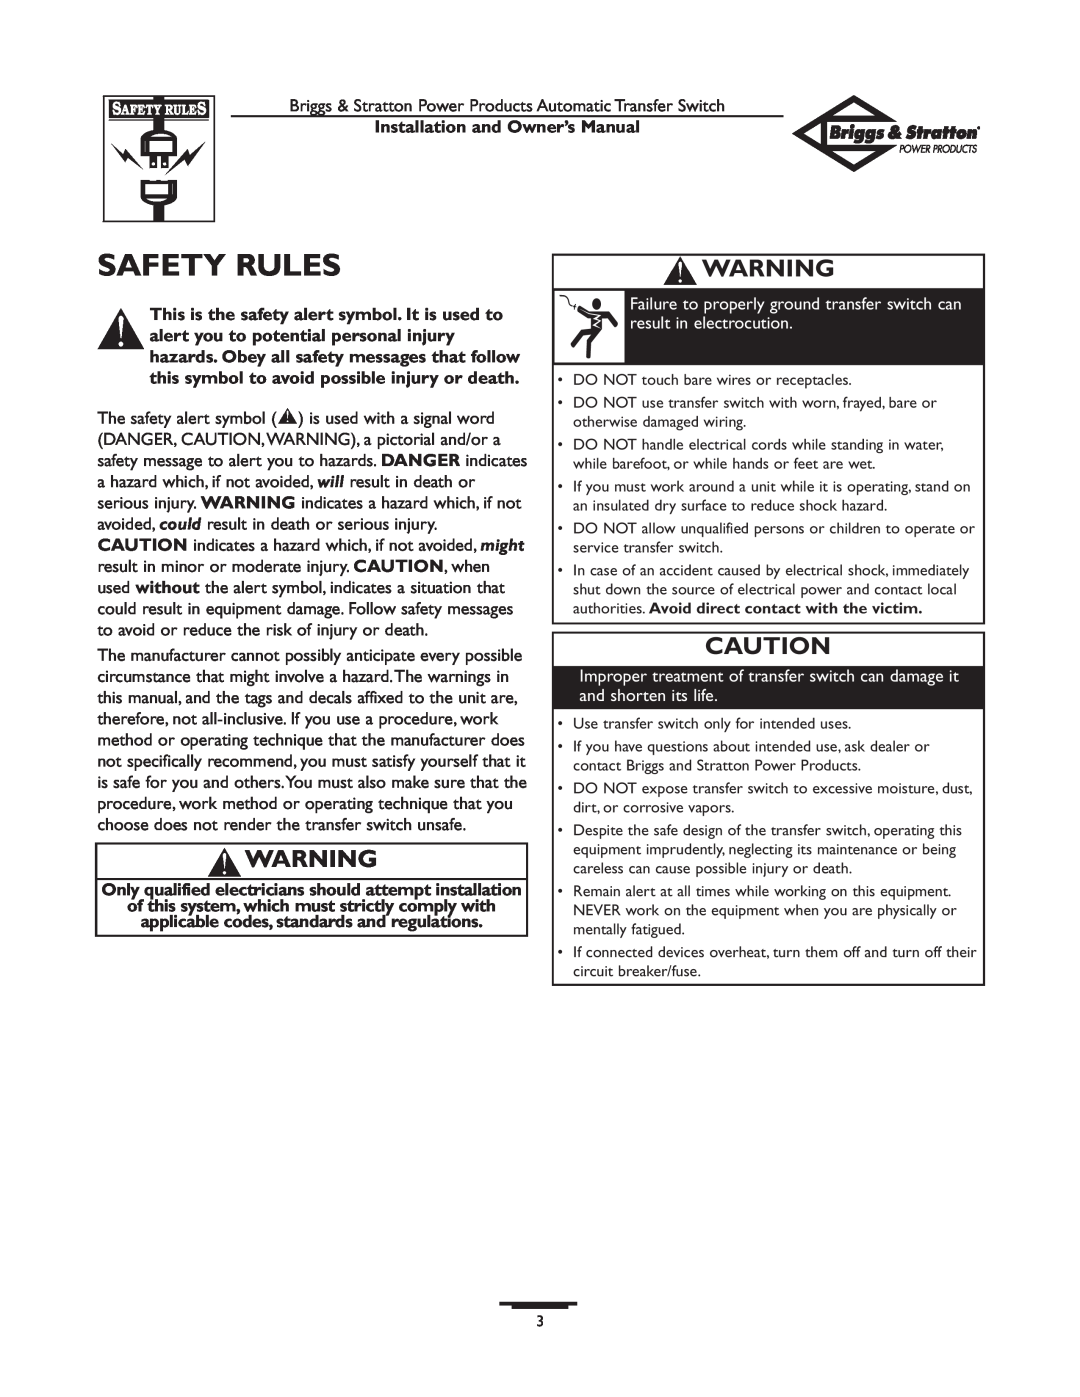 Briggs & Stratton 01813-0, 01814-0 owner manual Safety Rules, Only qualified electricians should attempt installation 